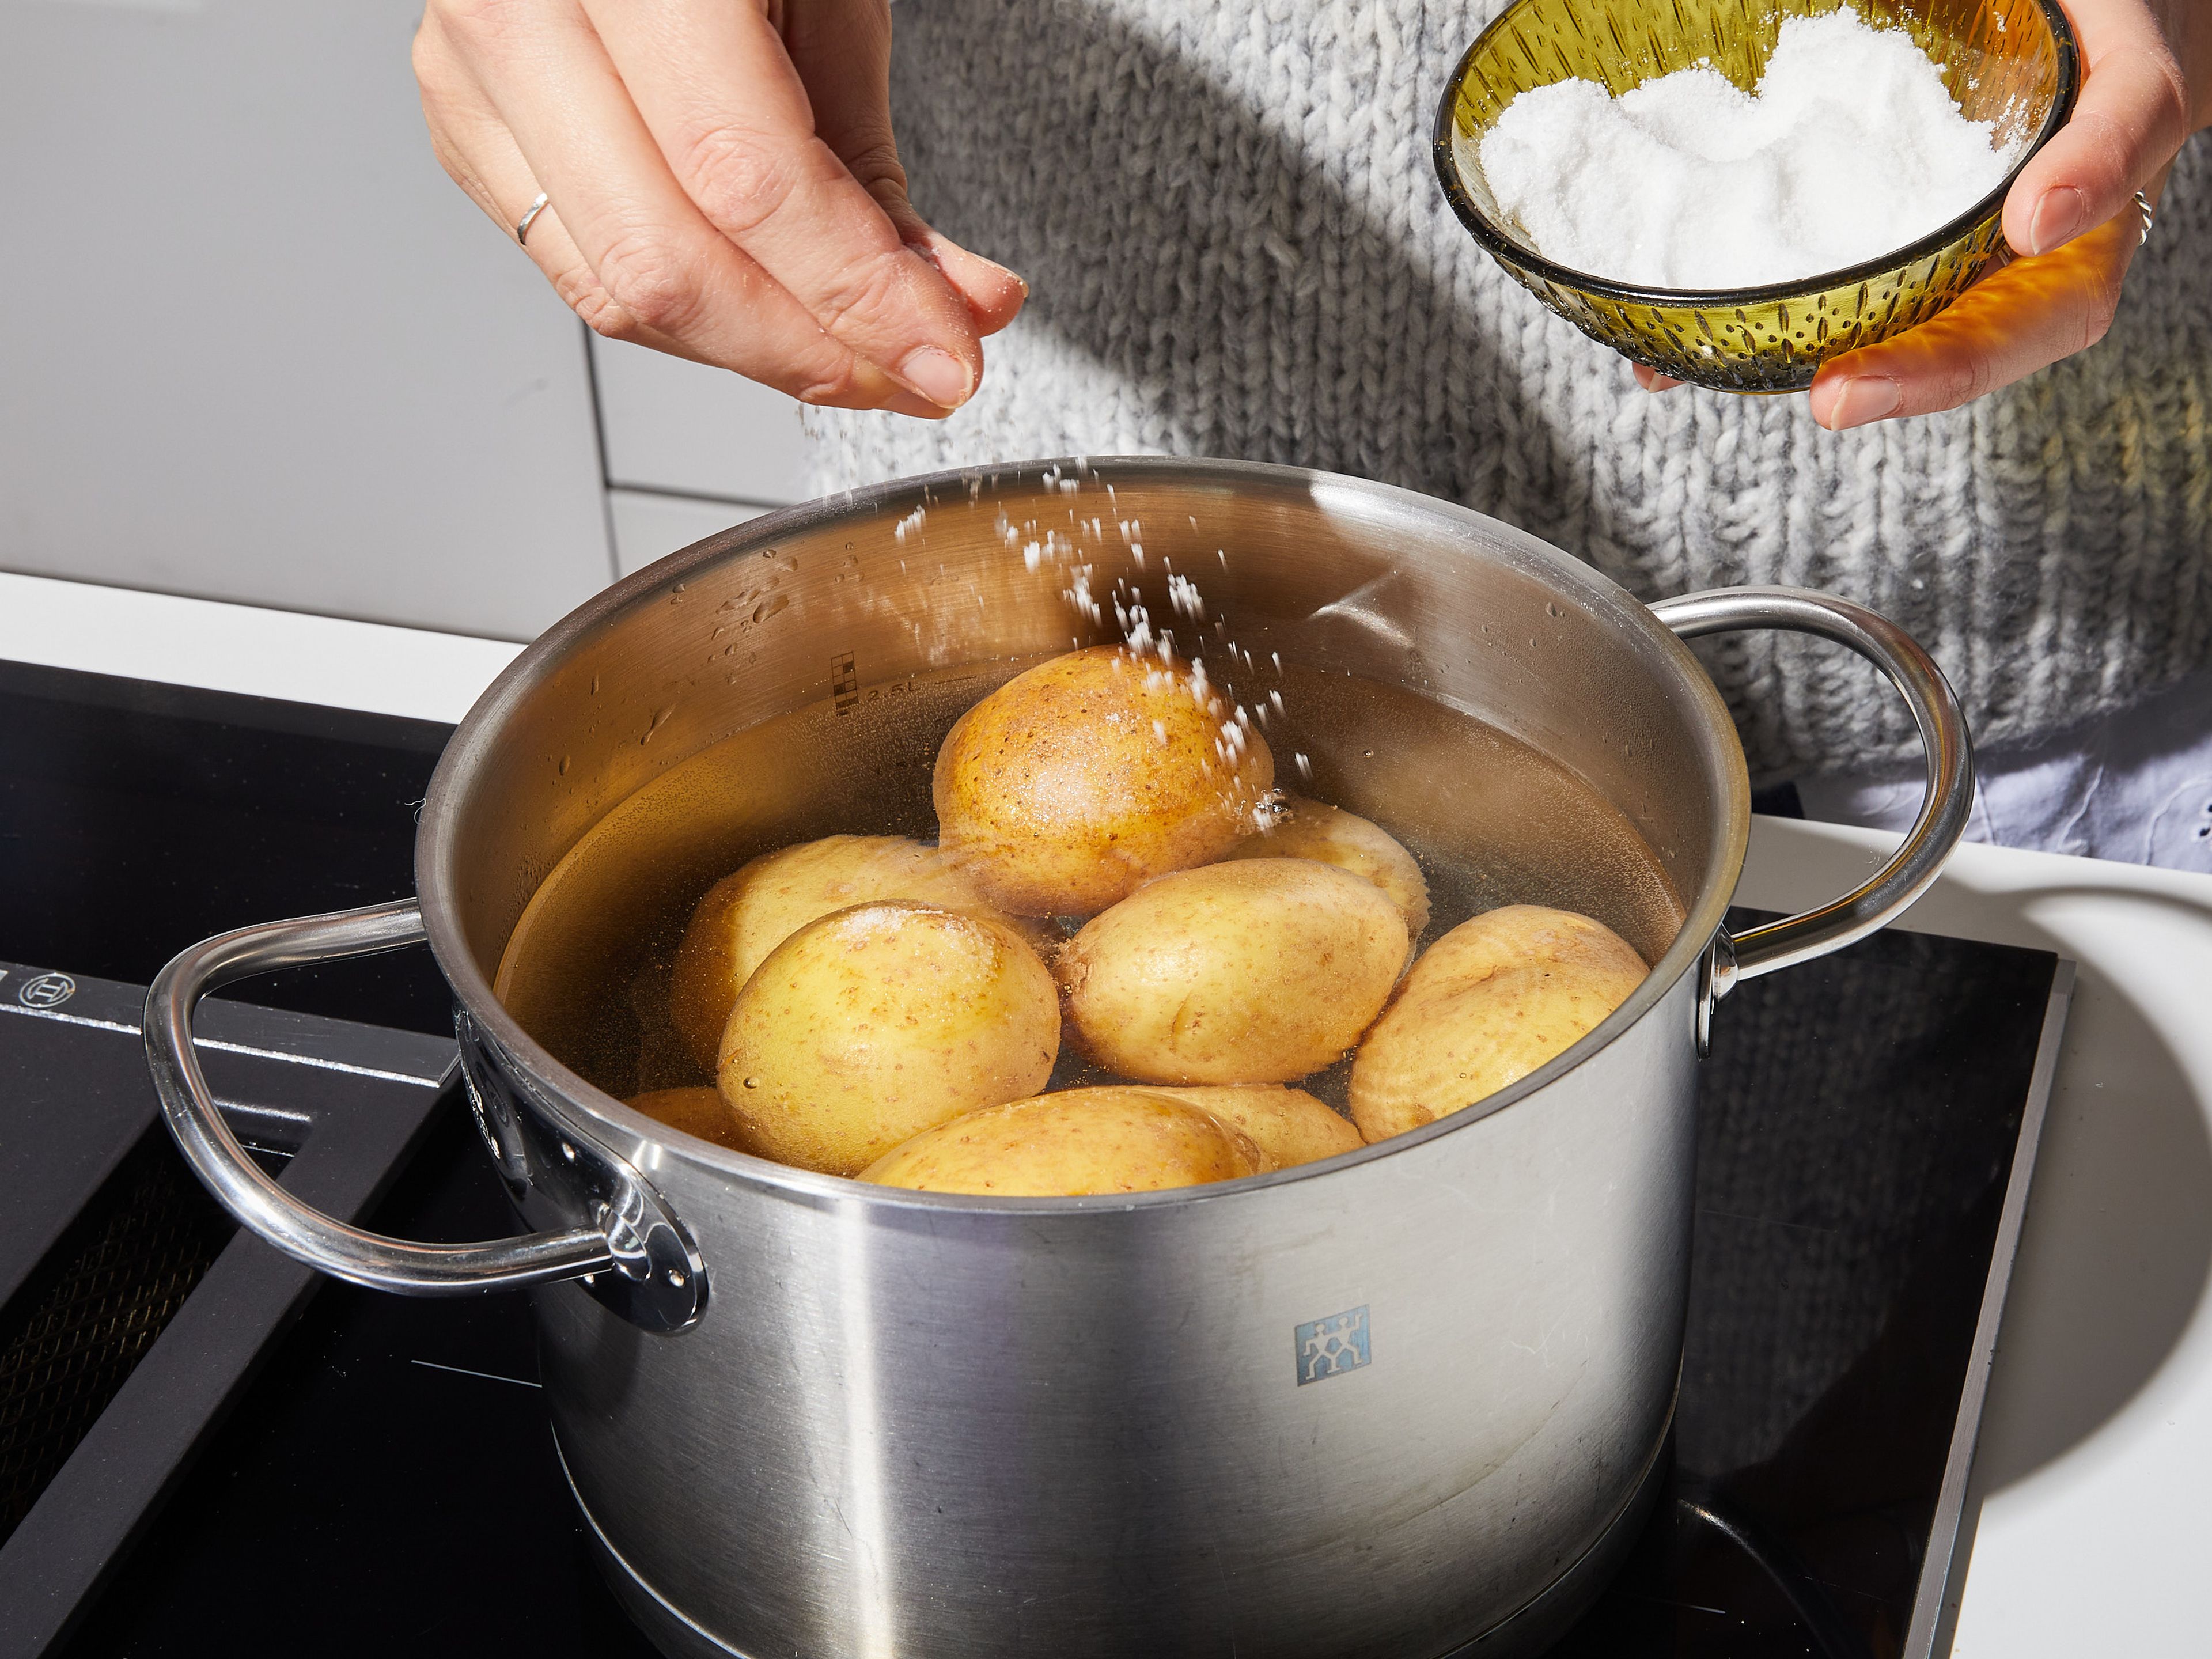 Preheat the oven to 200°C/392°F. Wash potatoes and leave the skin on. Add to a large pot of salted water, bring to a boil, then reduce heat slightly and cook, half-covered with a lid, for 20 min., or until you can easily insert a fork into a potato.  Drain potatoes and add to a large baking sheet, spaced out. Leave for 5 min to release some steam.